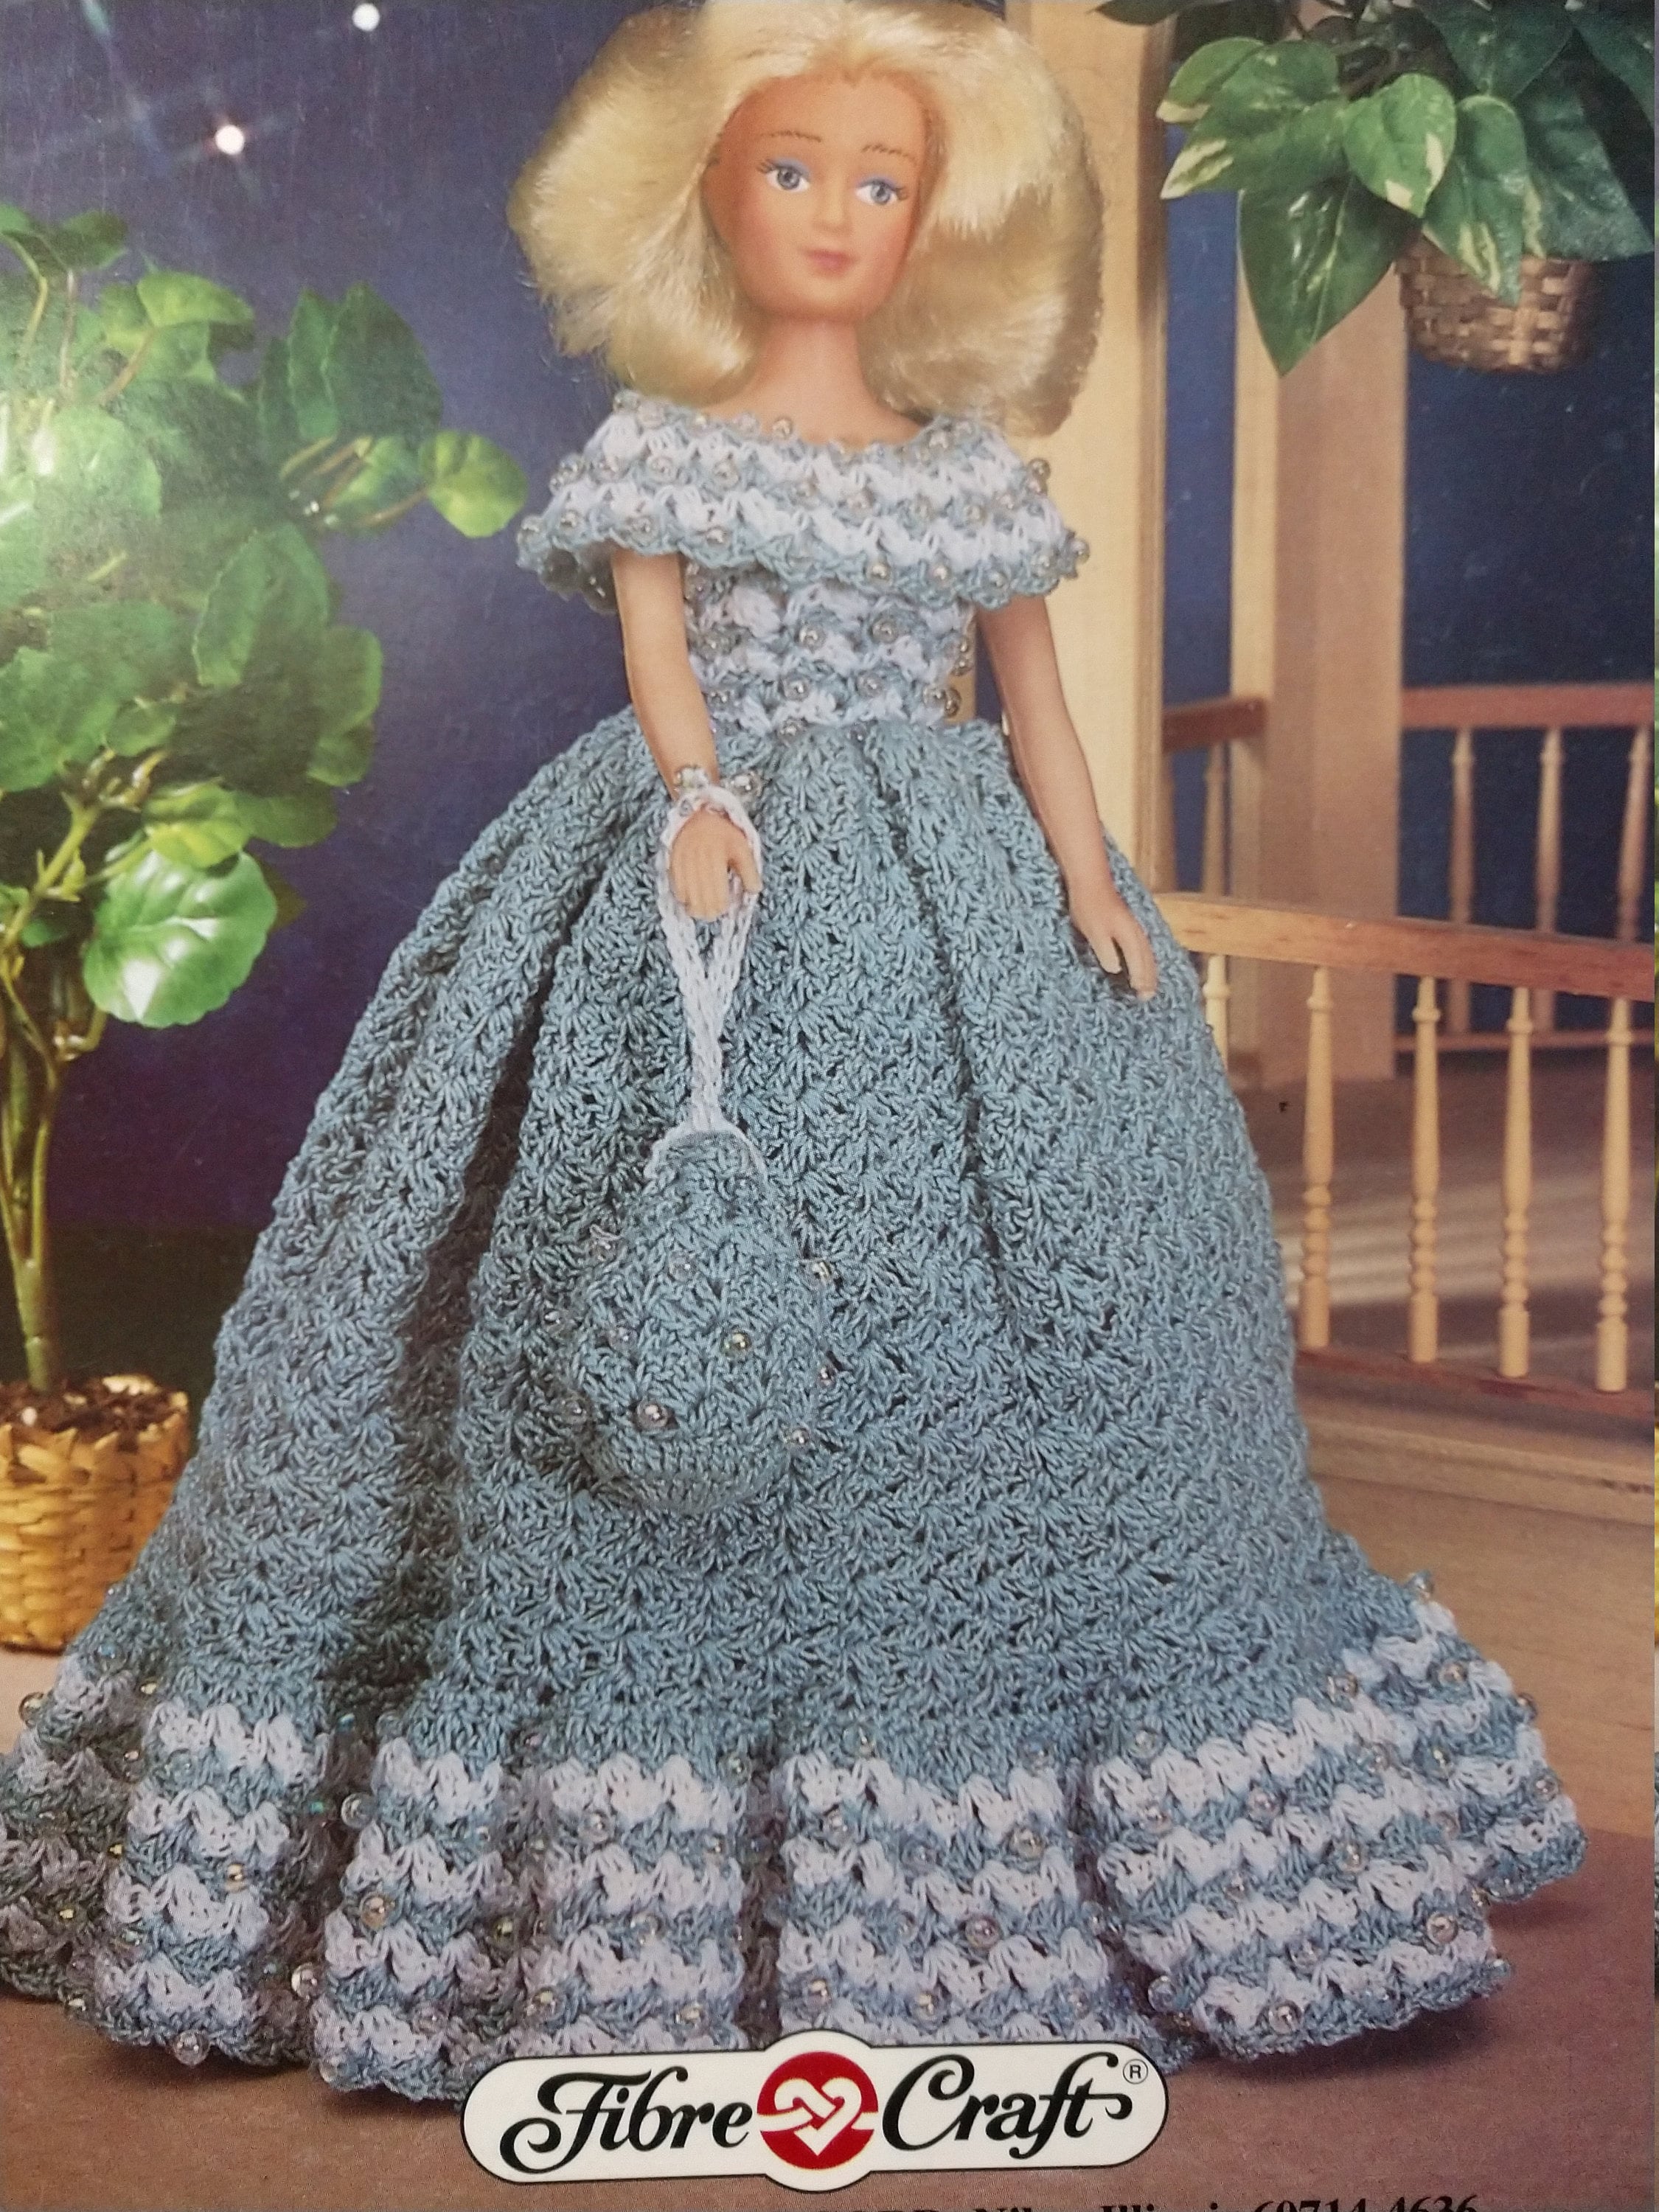 1955-1965 Jeweled Hollywood Gowns for Barbie Paradise 86 Crochet PATTERN NEW